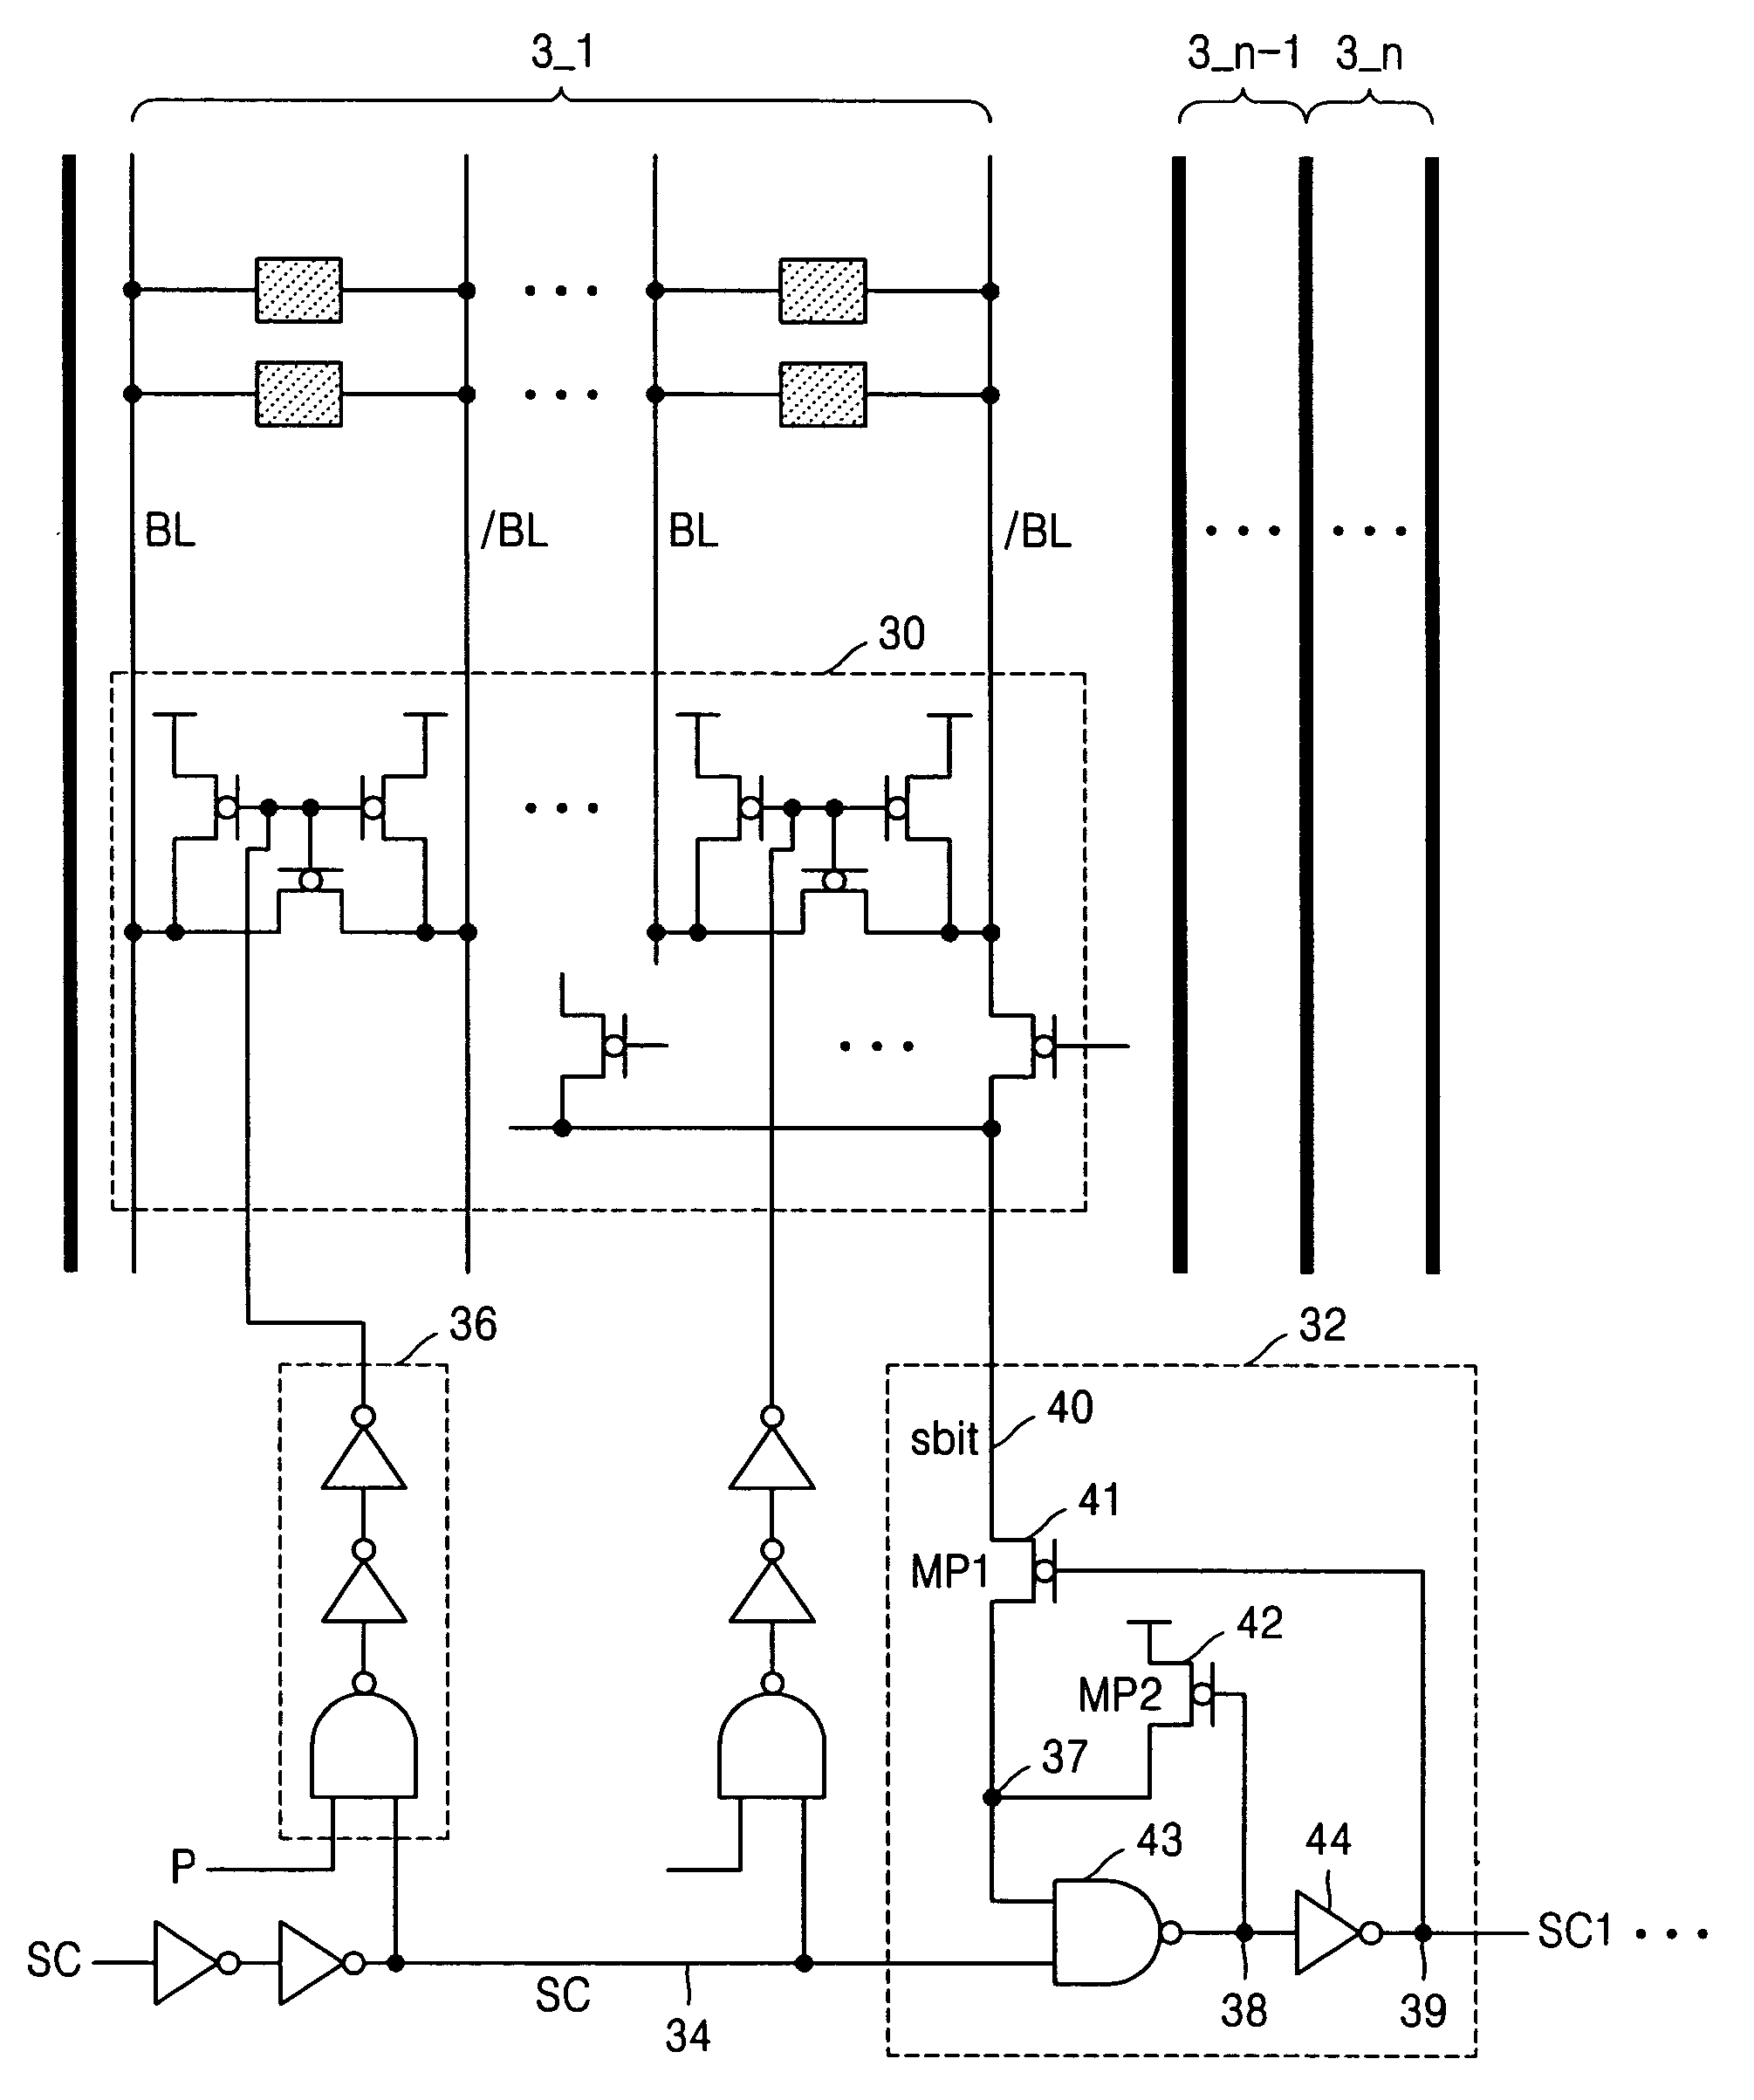 Cascade wake-up circuit preventing power noise in memory device